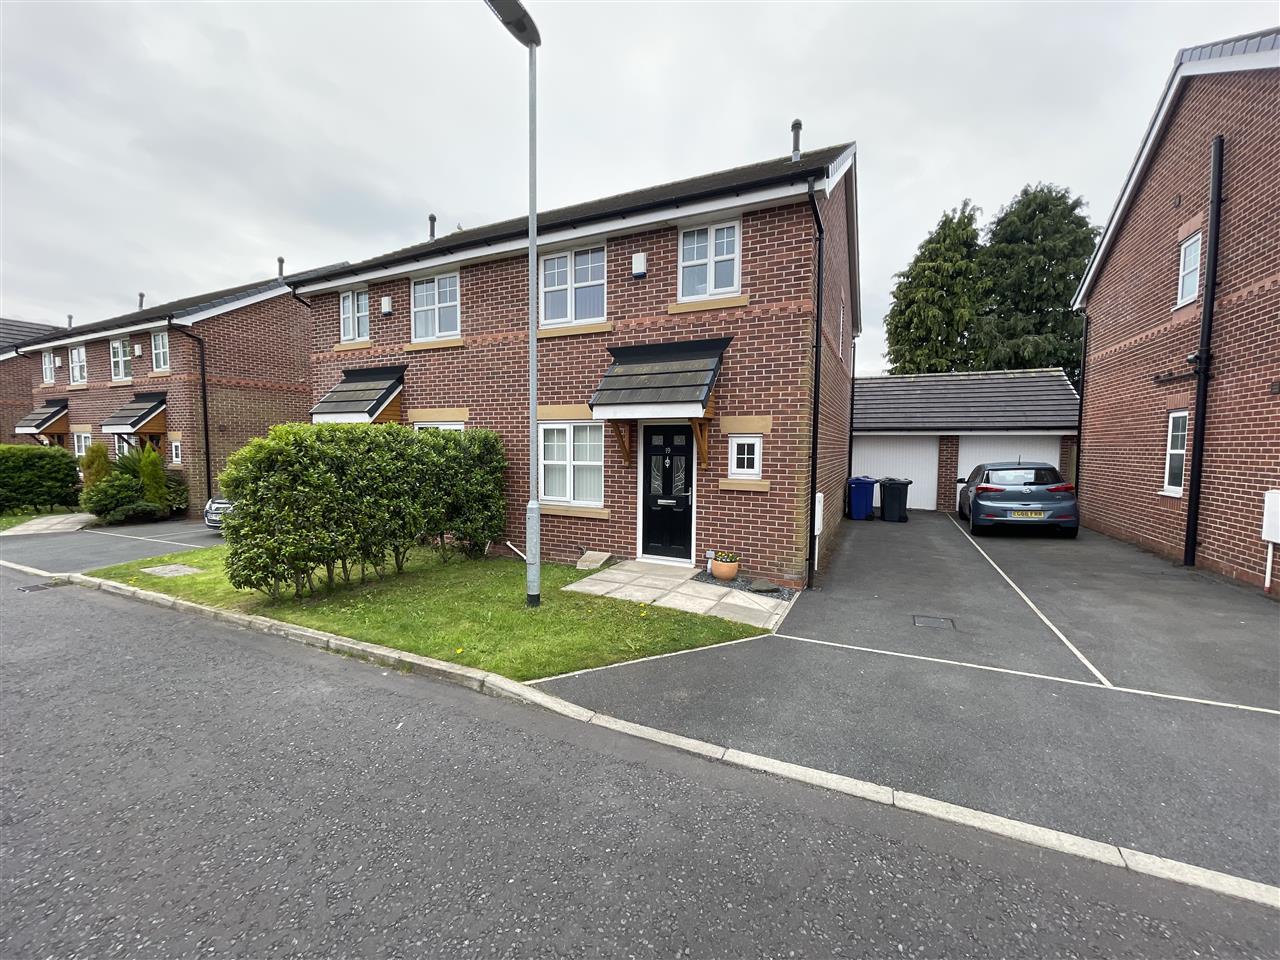 3 bed semi-detached for sale in Dukes Park Drive, Chorley - Property Image 1